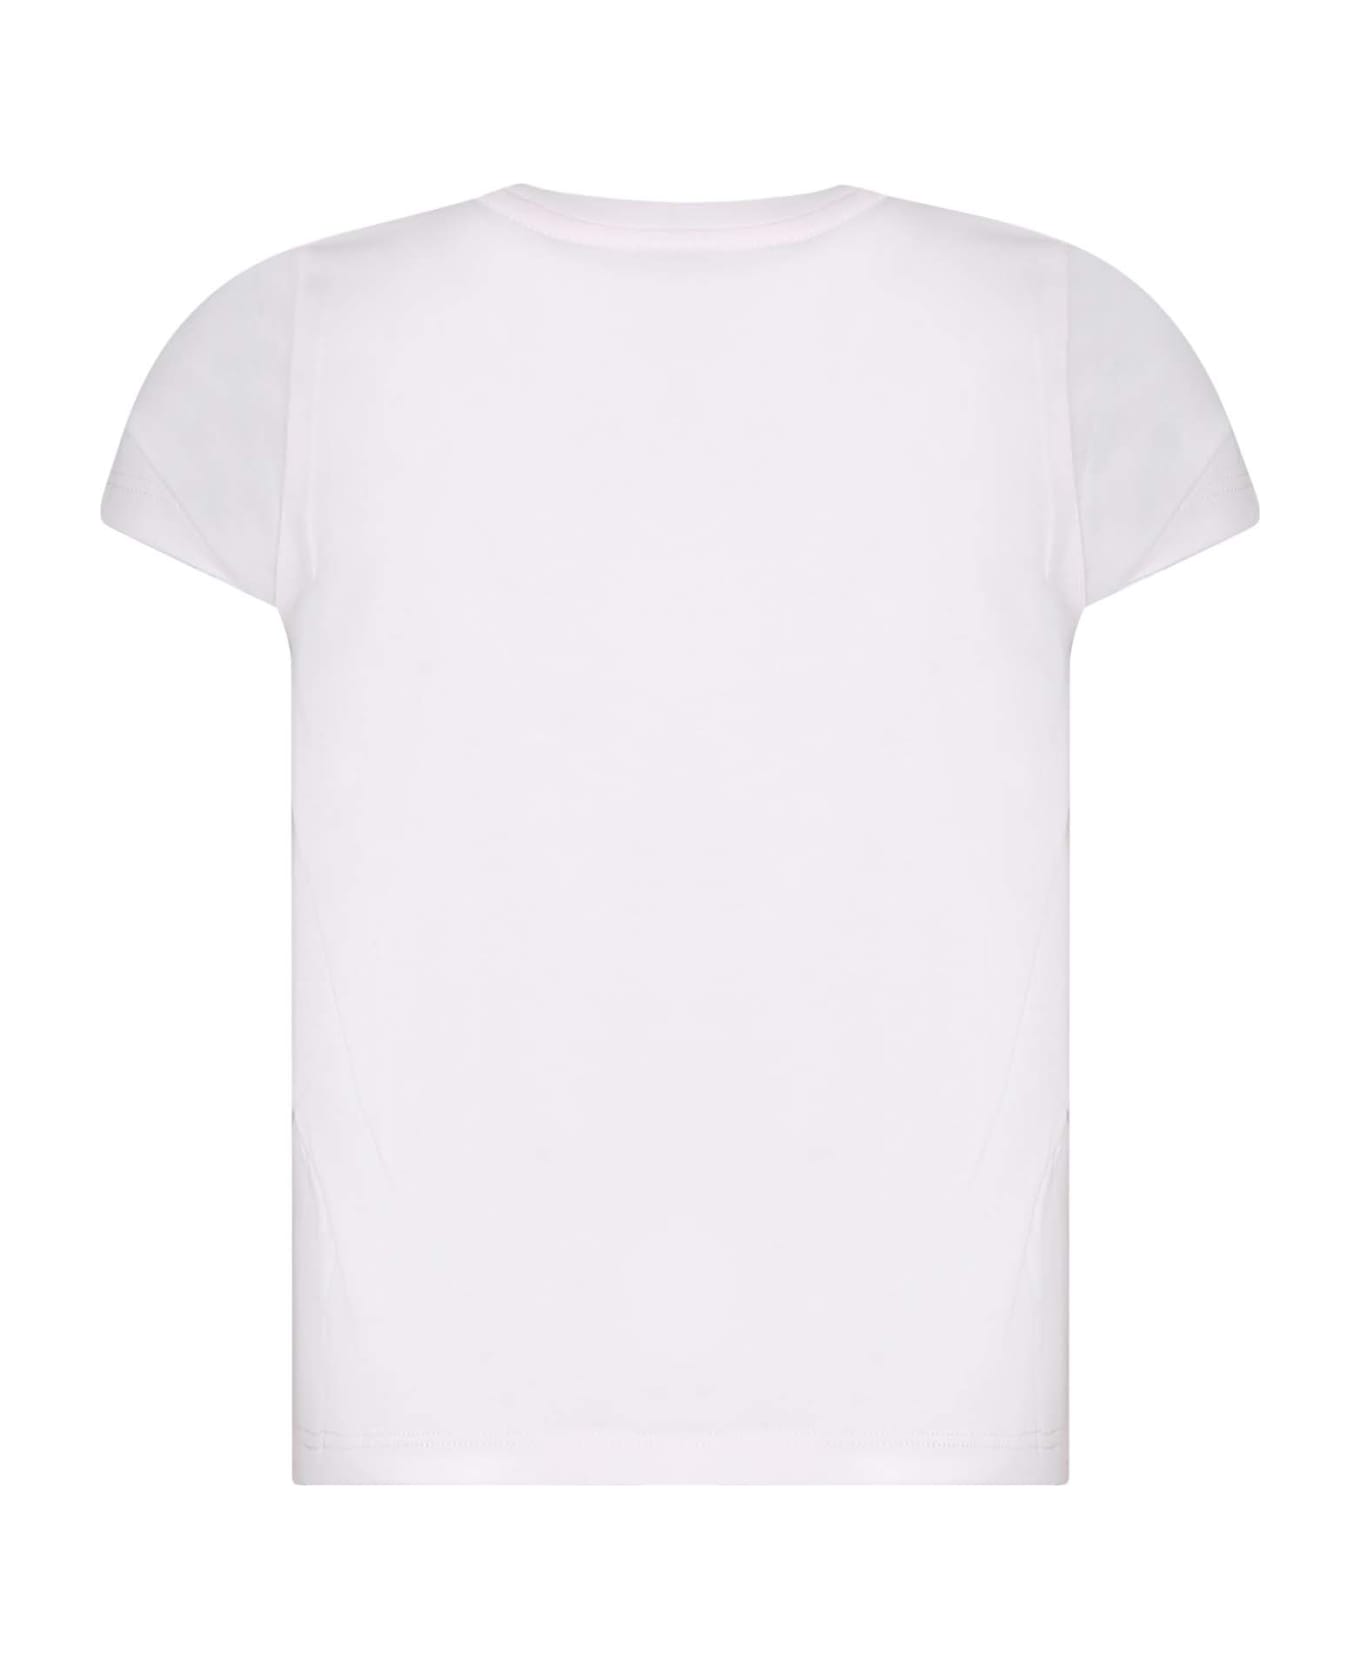 Lanvin Pink T-shirt For Girl With Logo - Pink